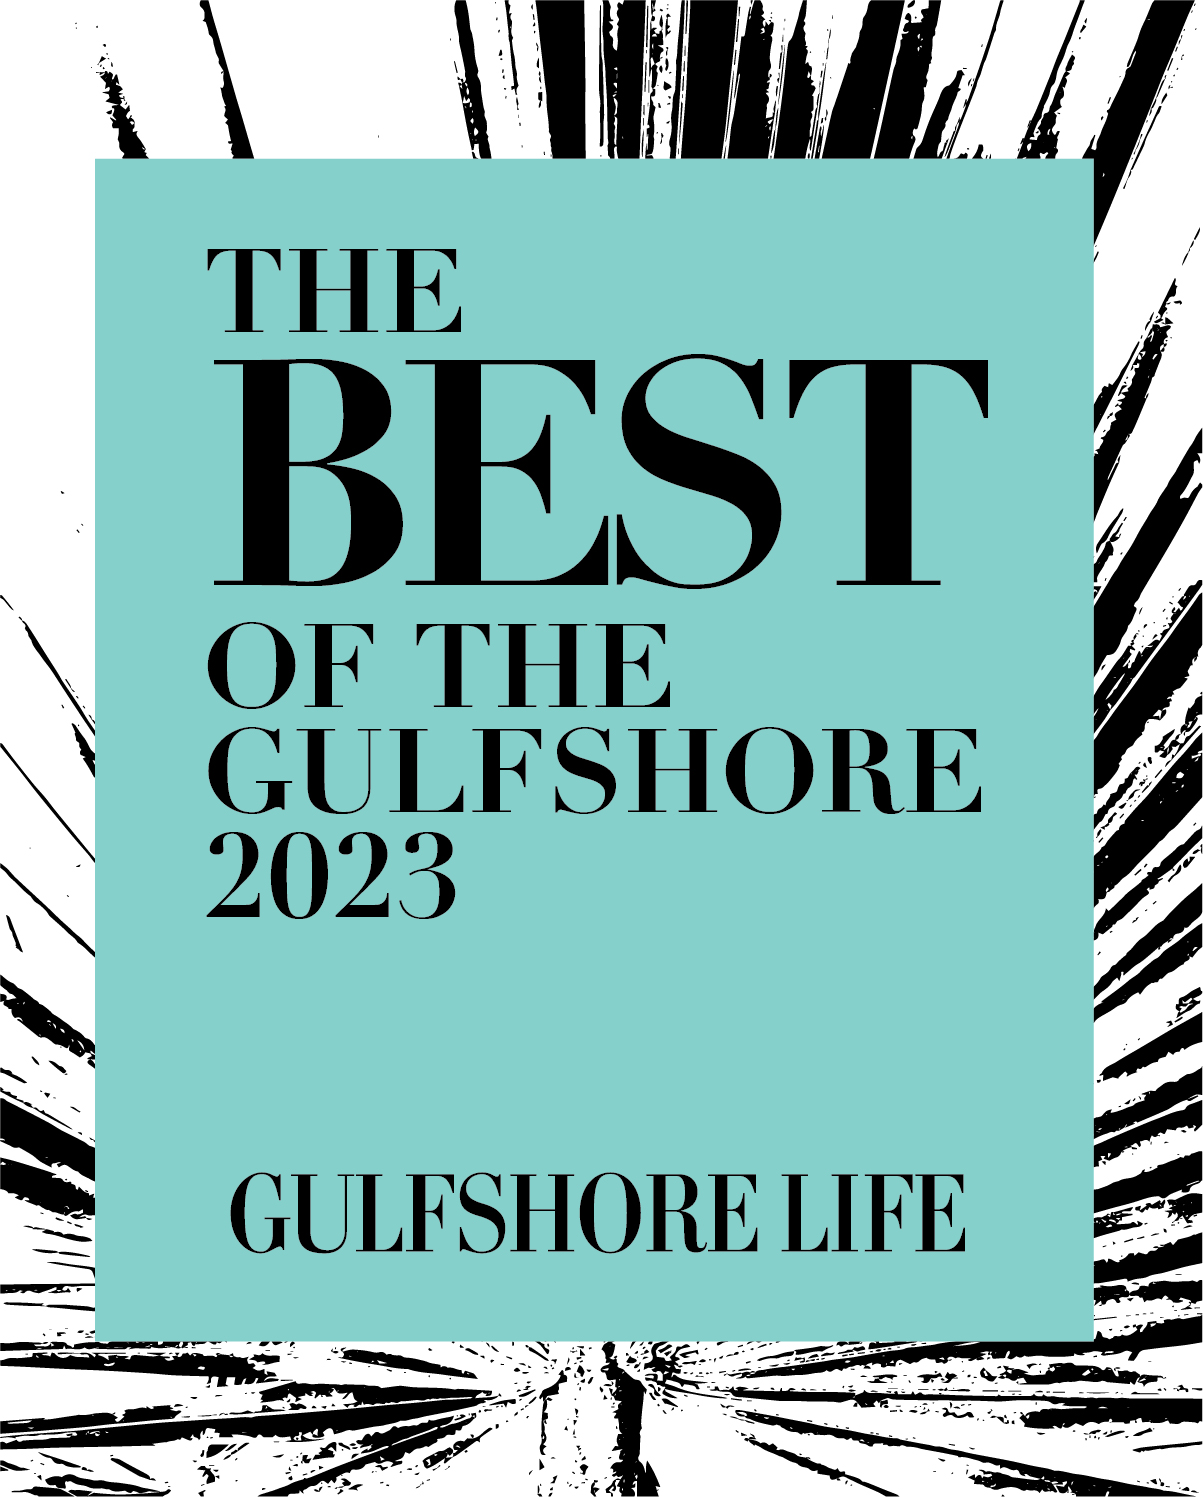 The Best of the Gulfshore 2023- Interior Design Firms